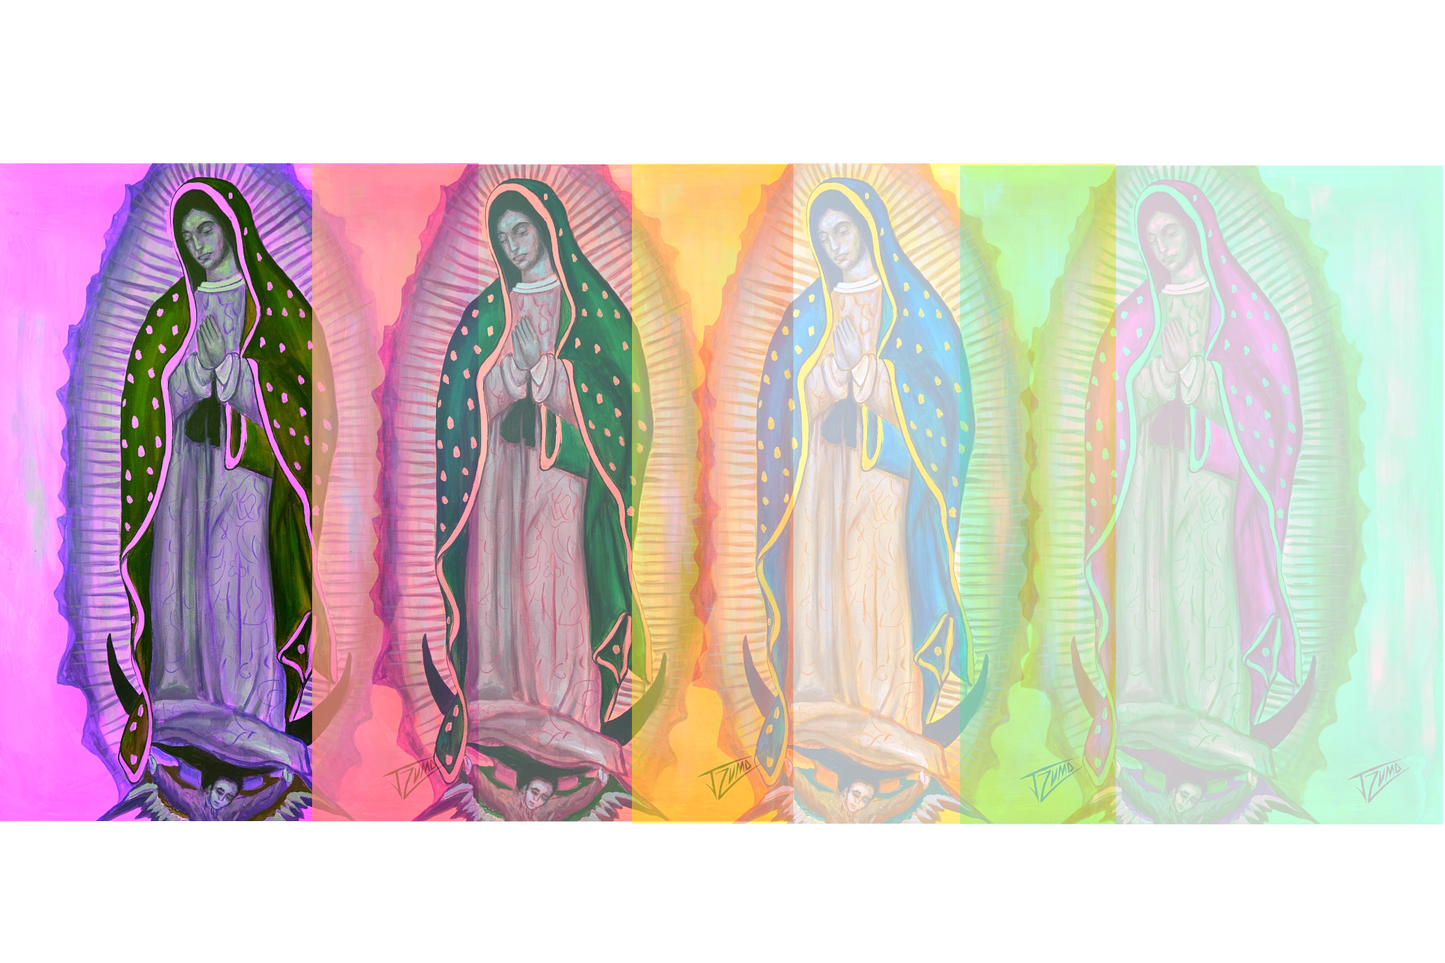 Our Lady of Guadalupe - Spectral Vision 2